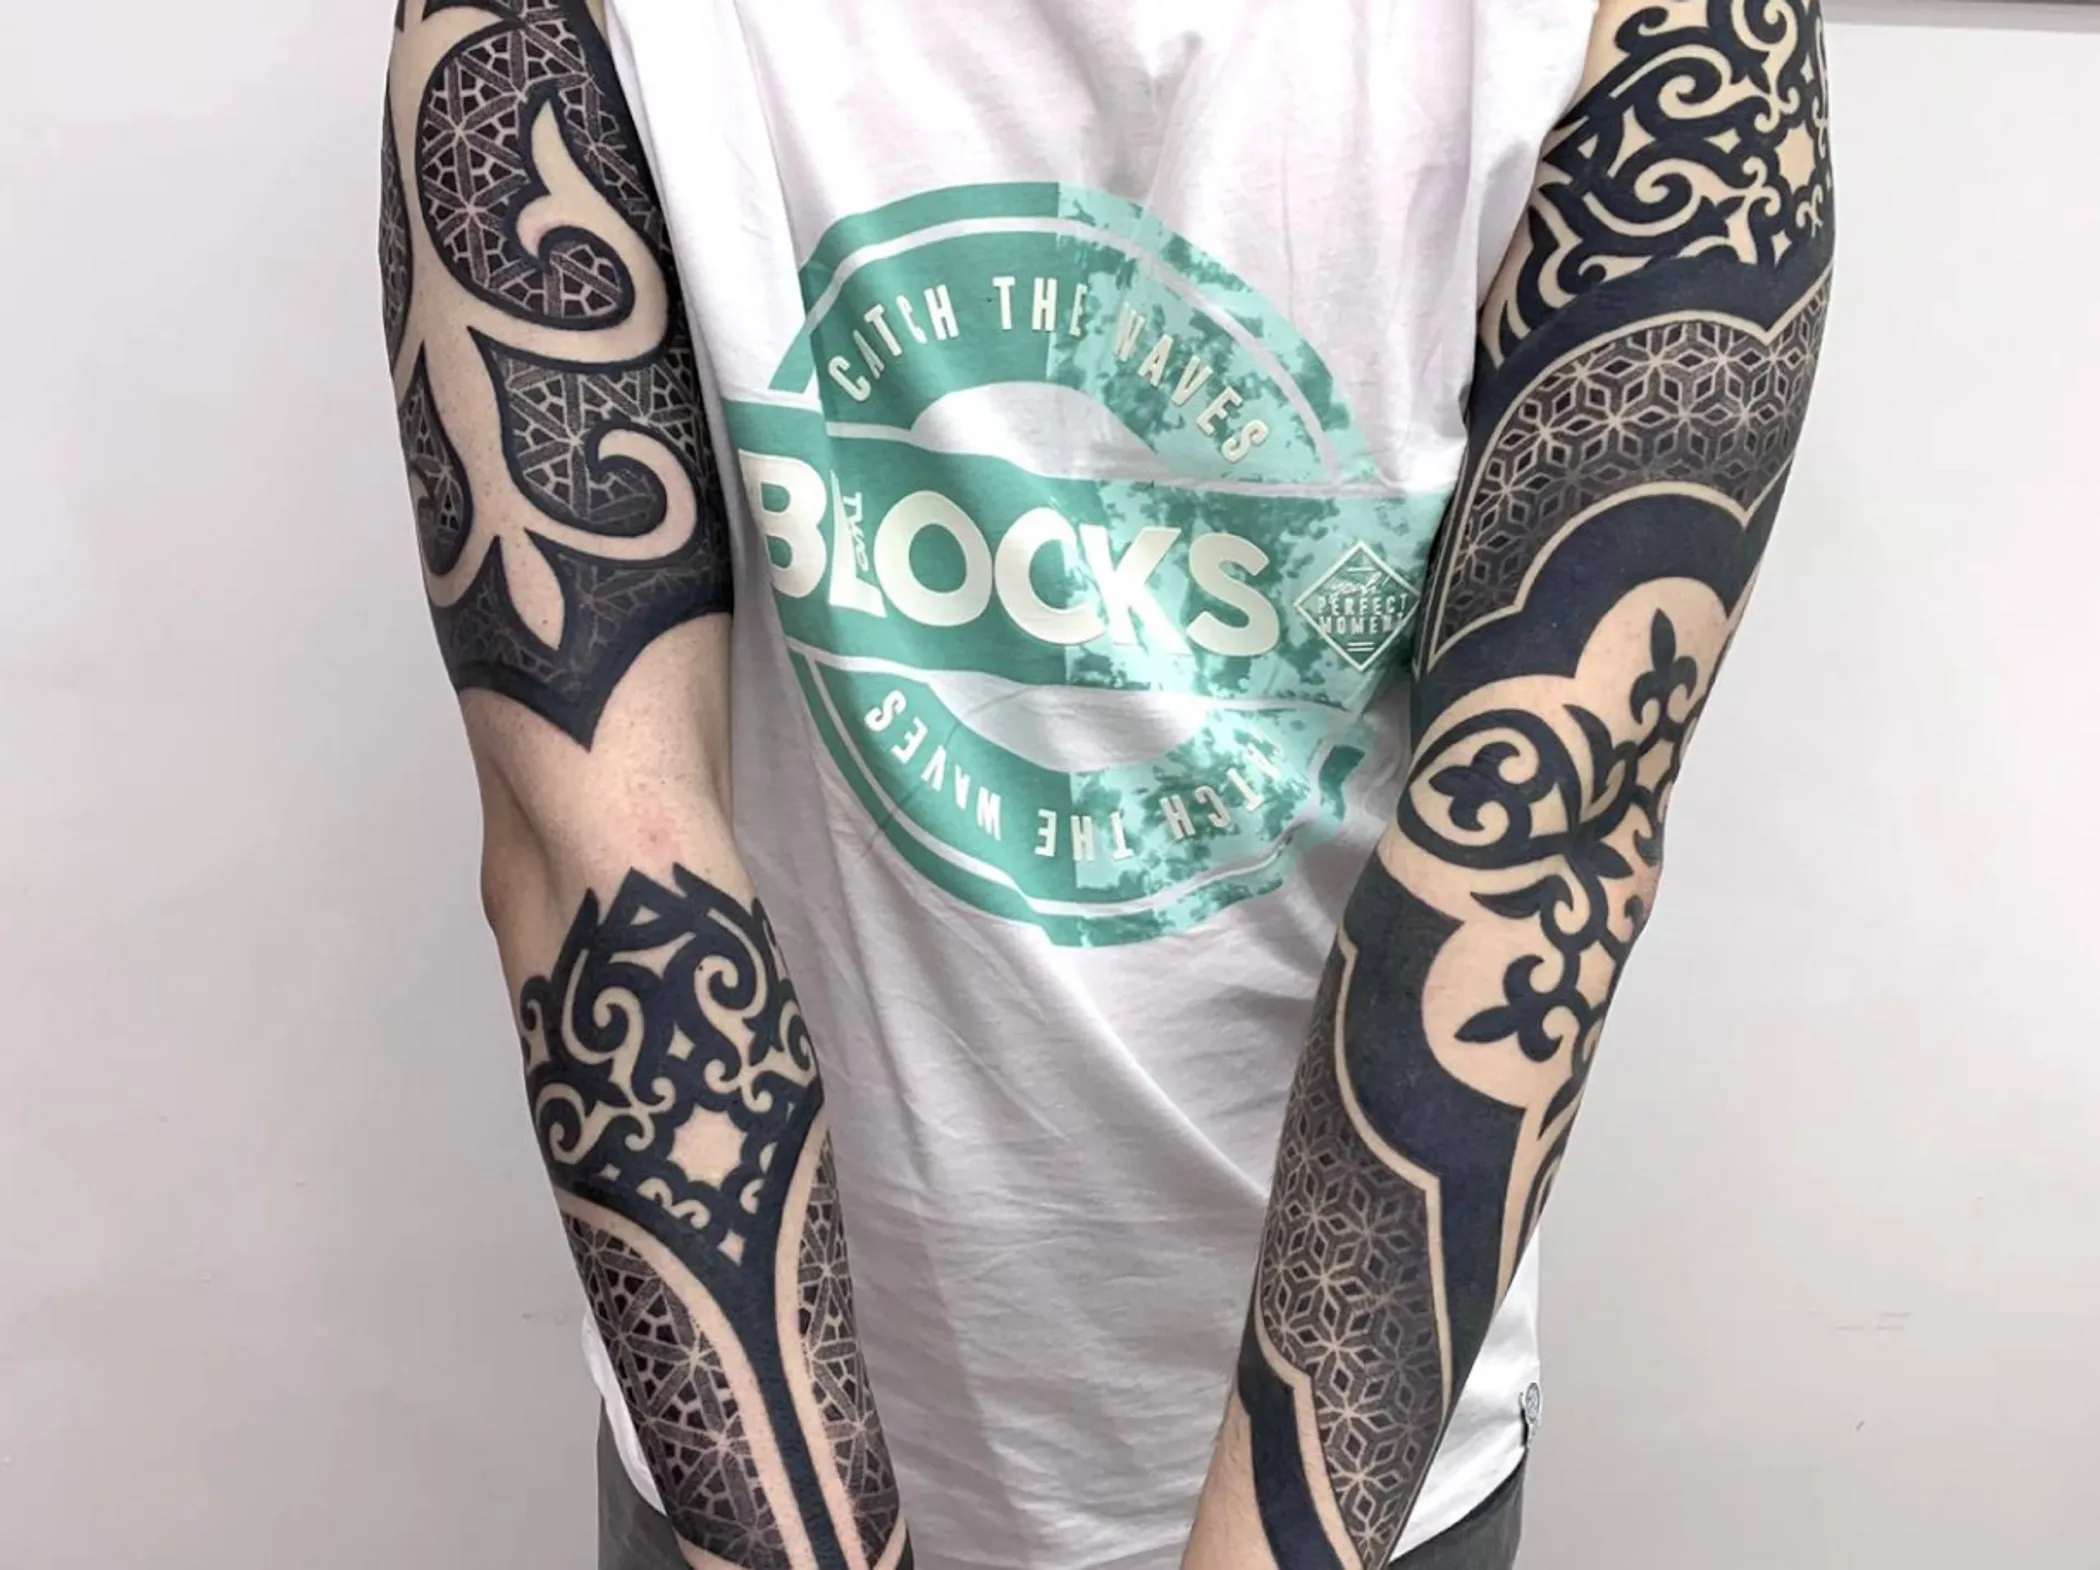 My favorite work is two tattooed “sleeves”. The client put his complete trust in me to do the job from start to finish and I got to make it entirely to my liking